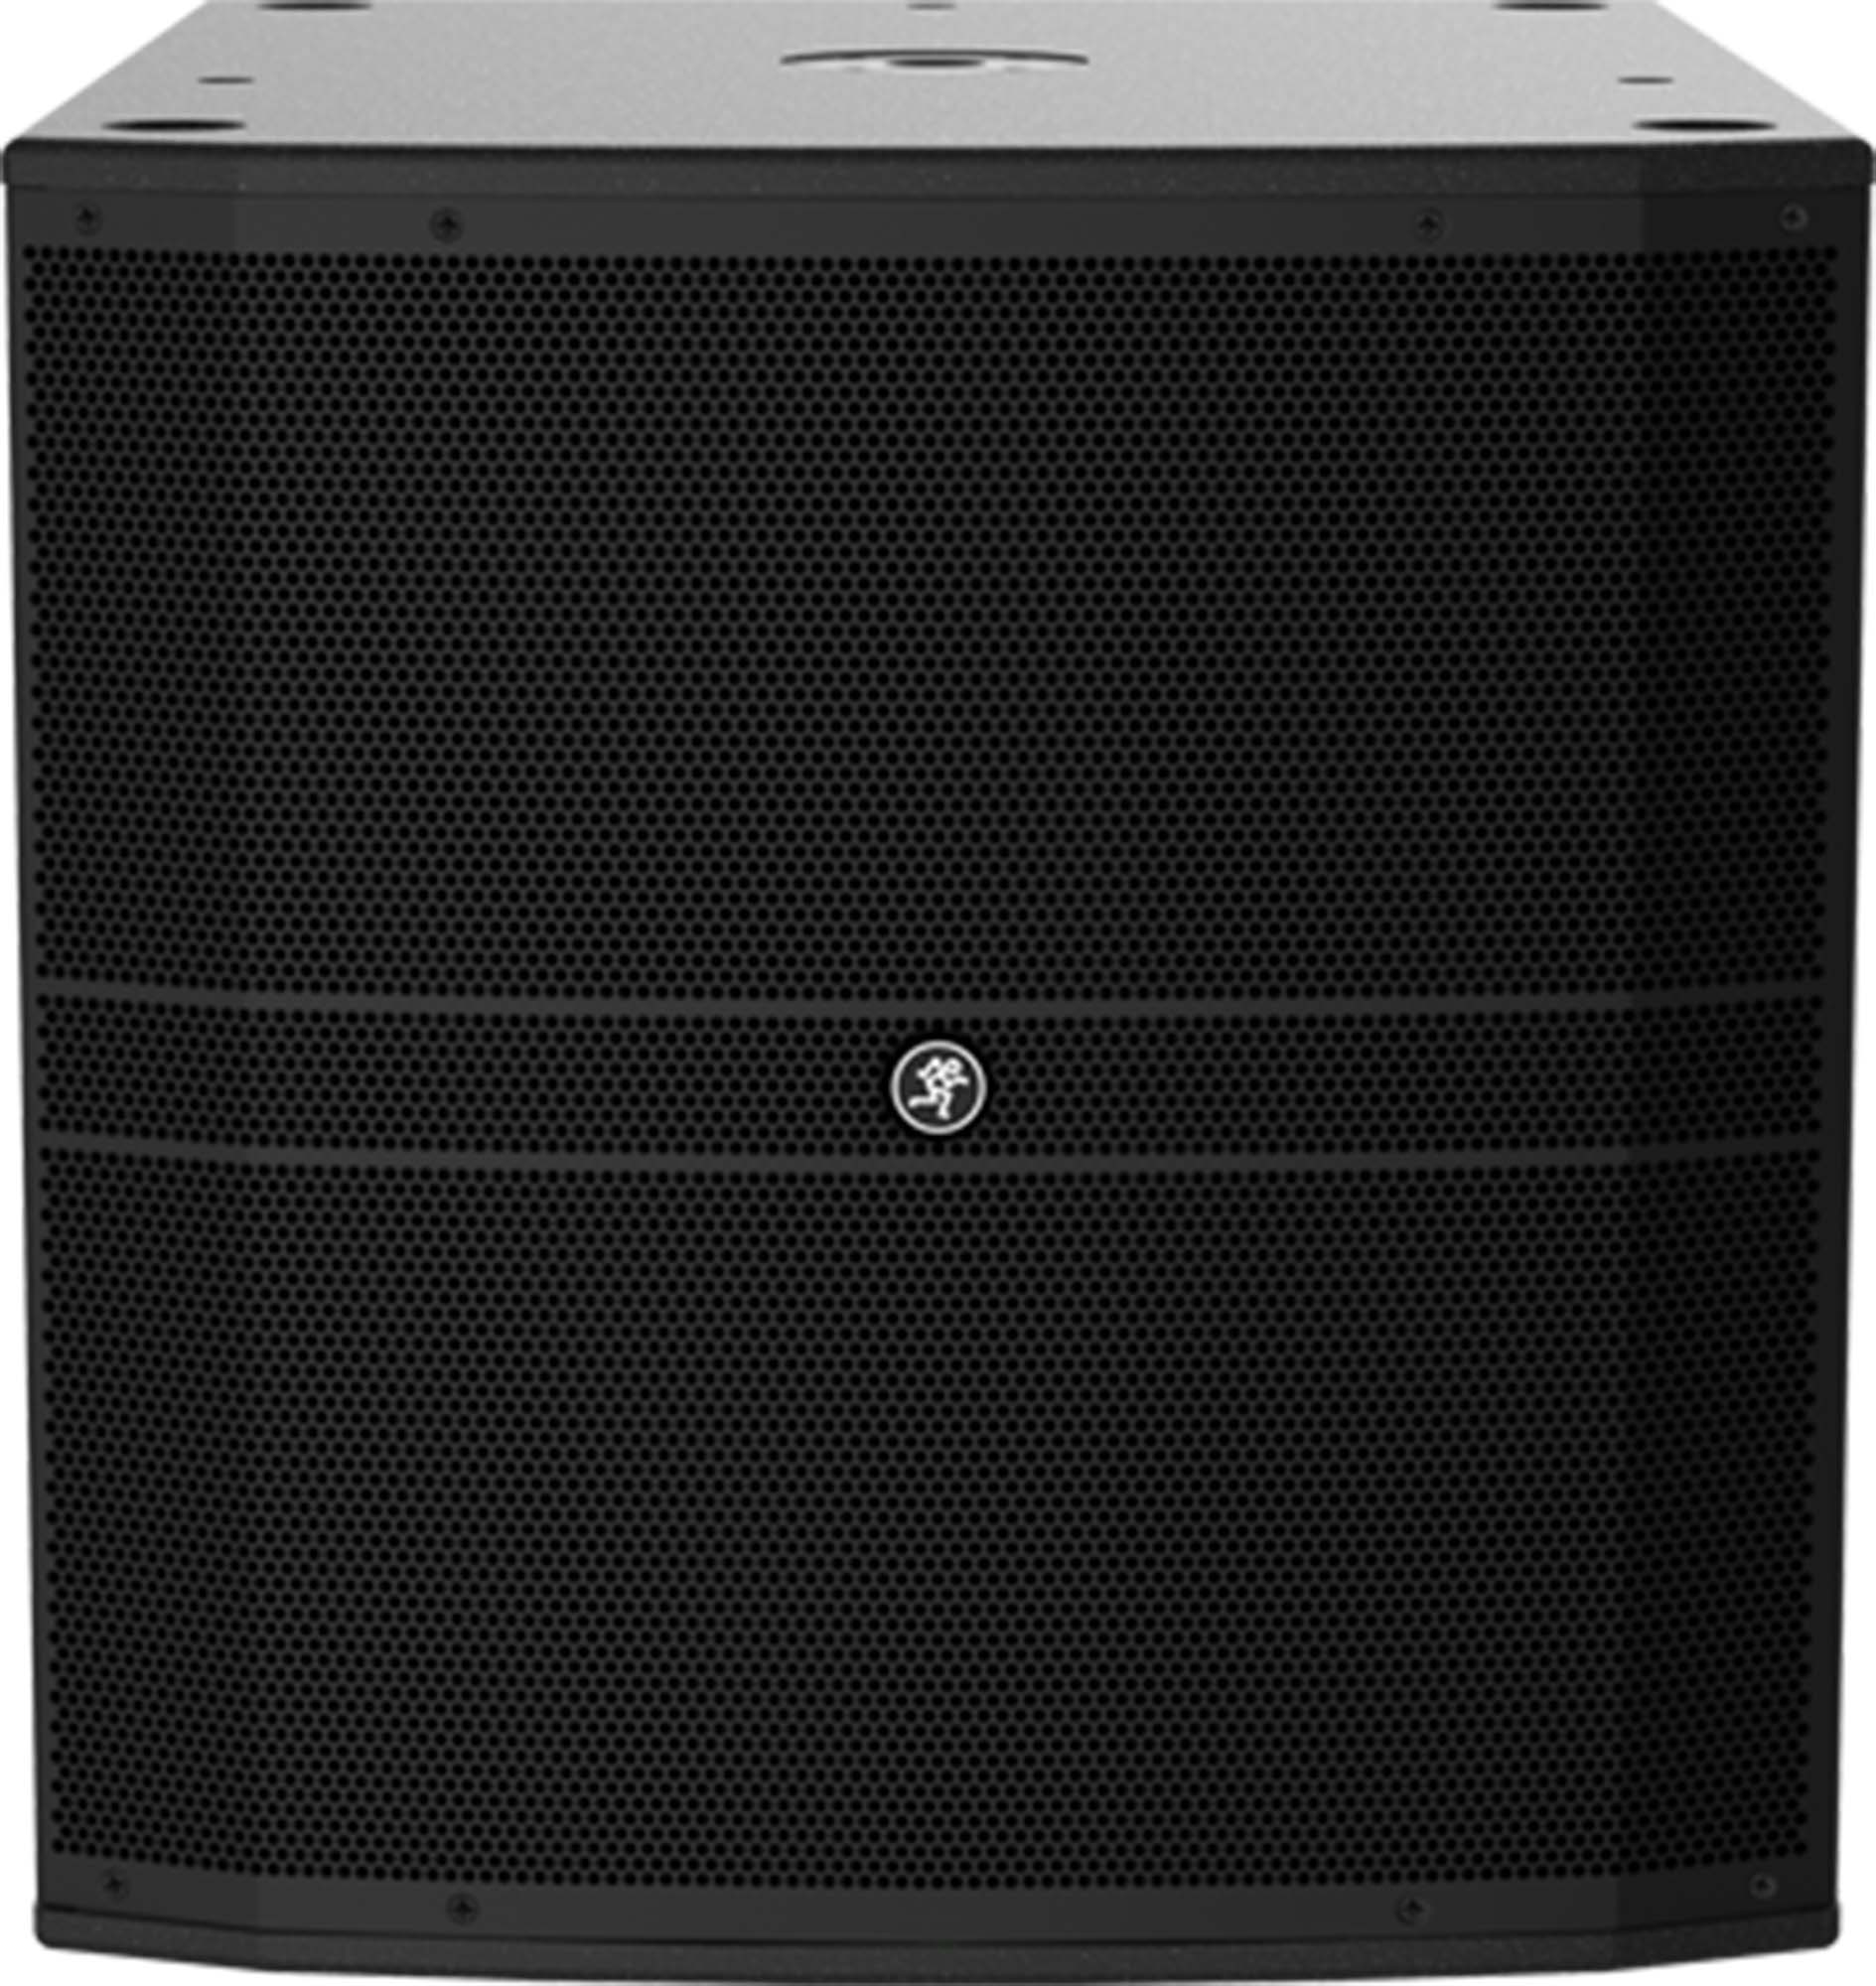 Mackie DRM18S 2000W 18" Professional Powered Subwoofer - Hollywood DJ